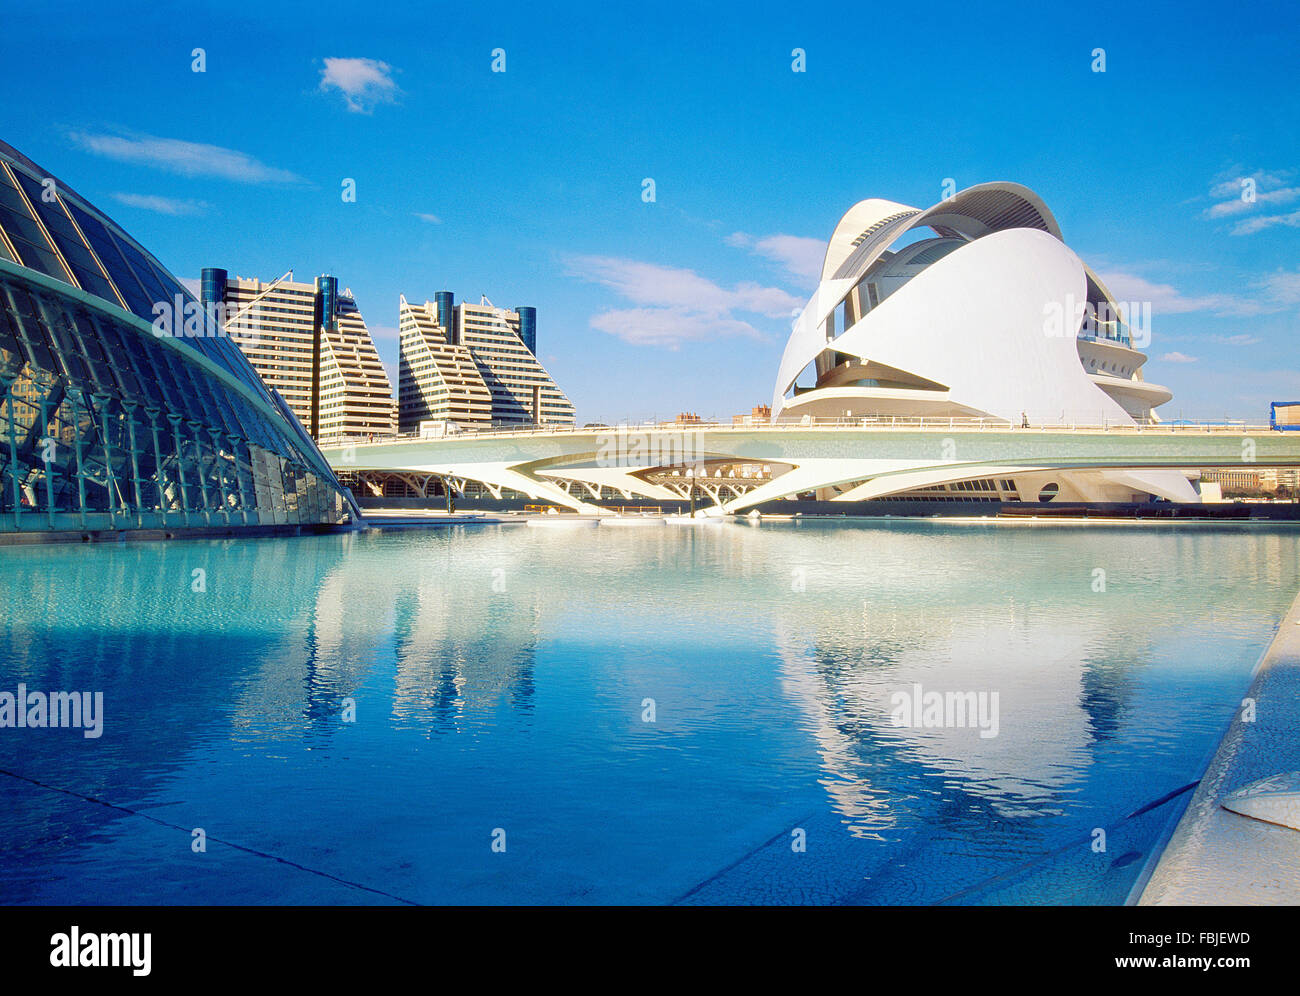 Arts Palace and its reflection on the pond. City of Arts and Sciences, Valencia, Spain. Stock Photo